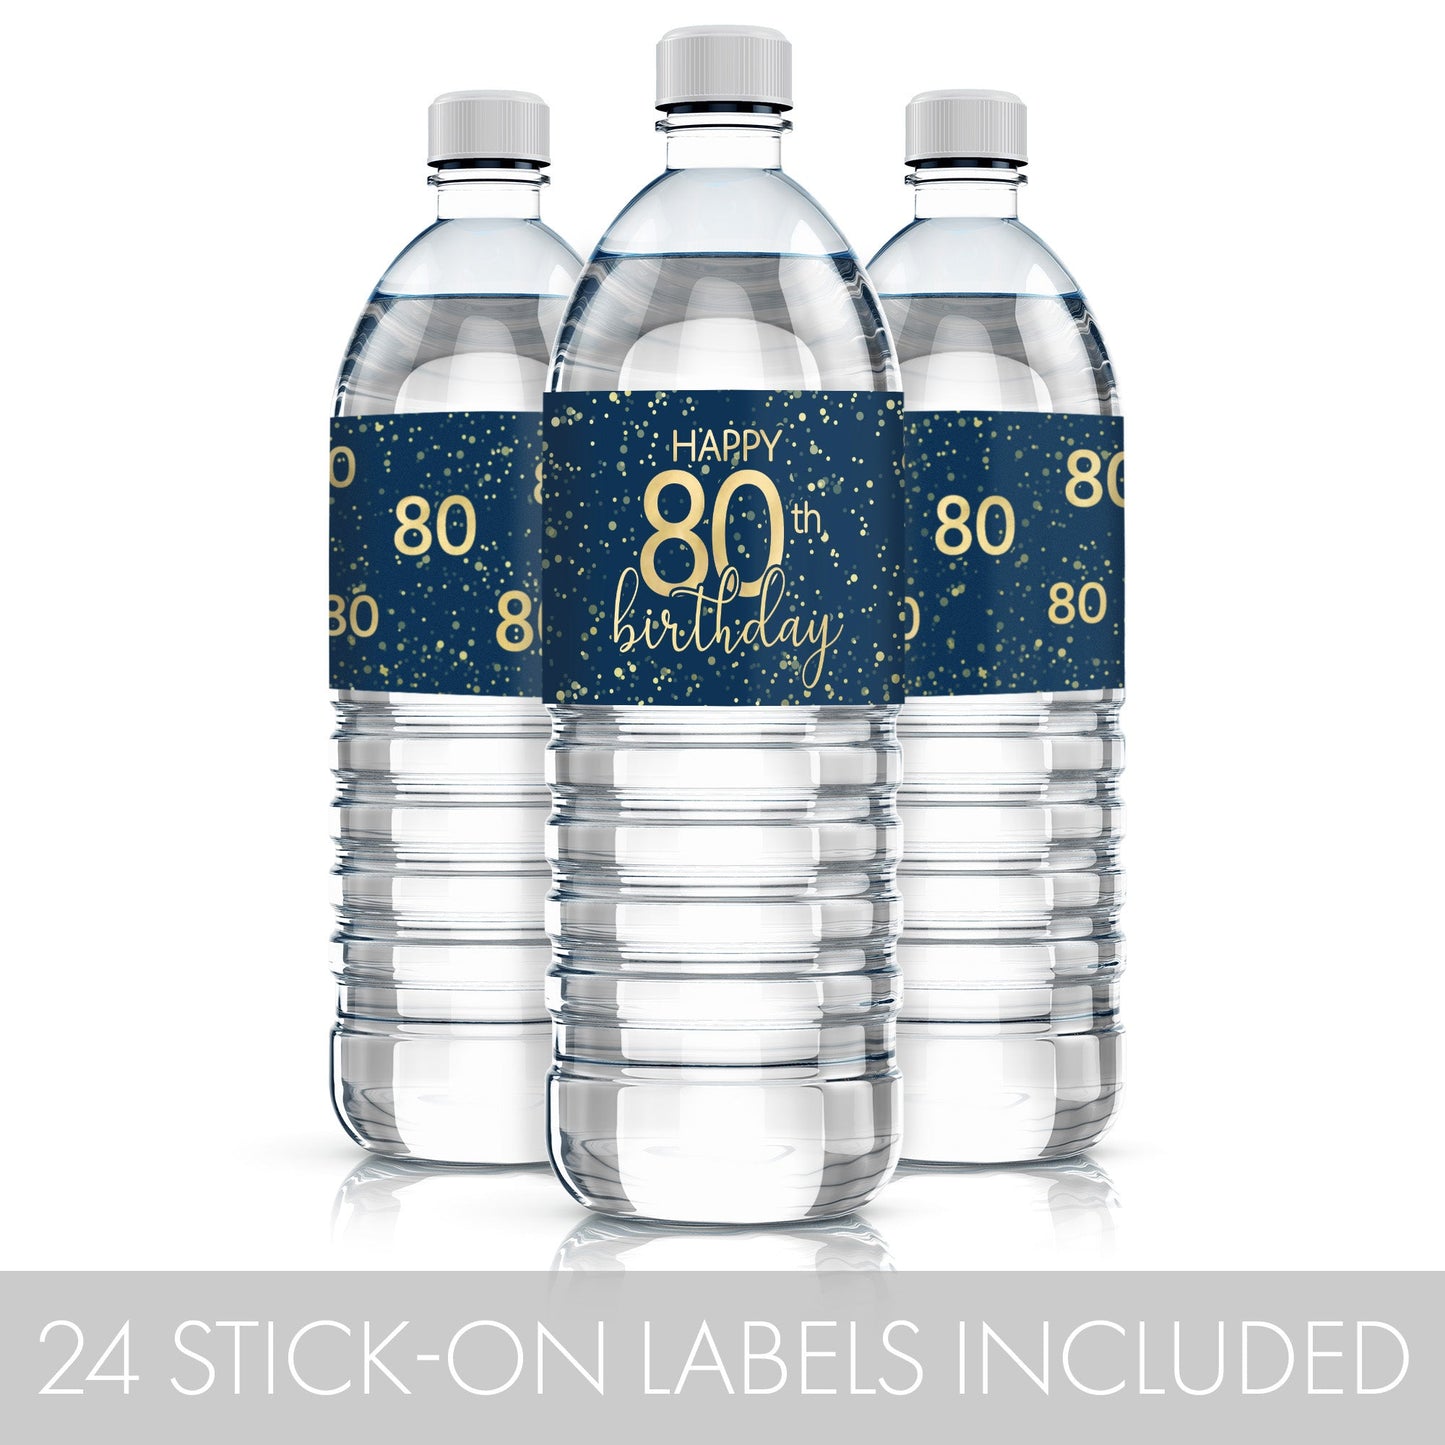 waterproof water bottle labels in navy blue with bold gold lettering that celebrates the milestone of an 80th birthday